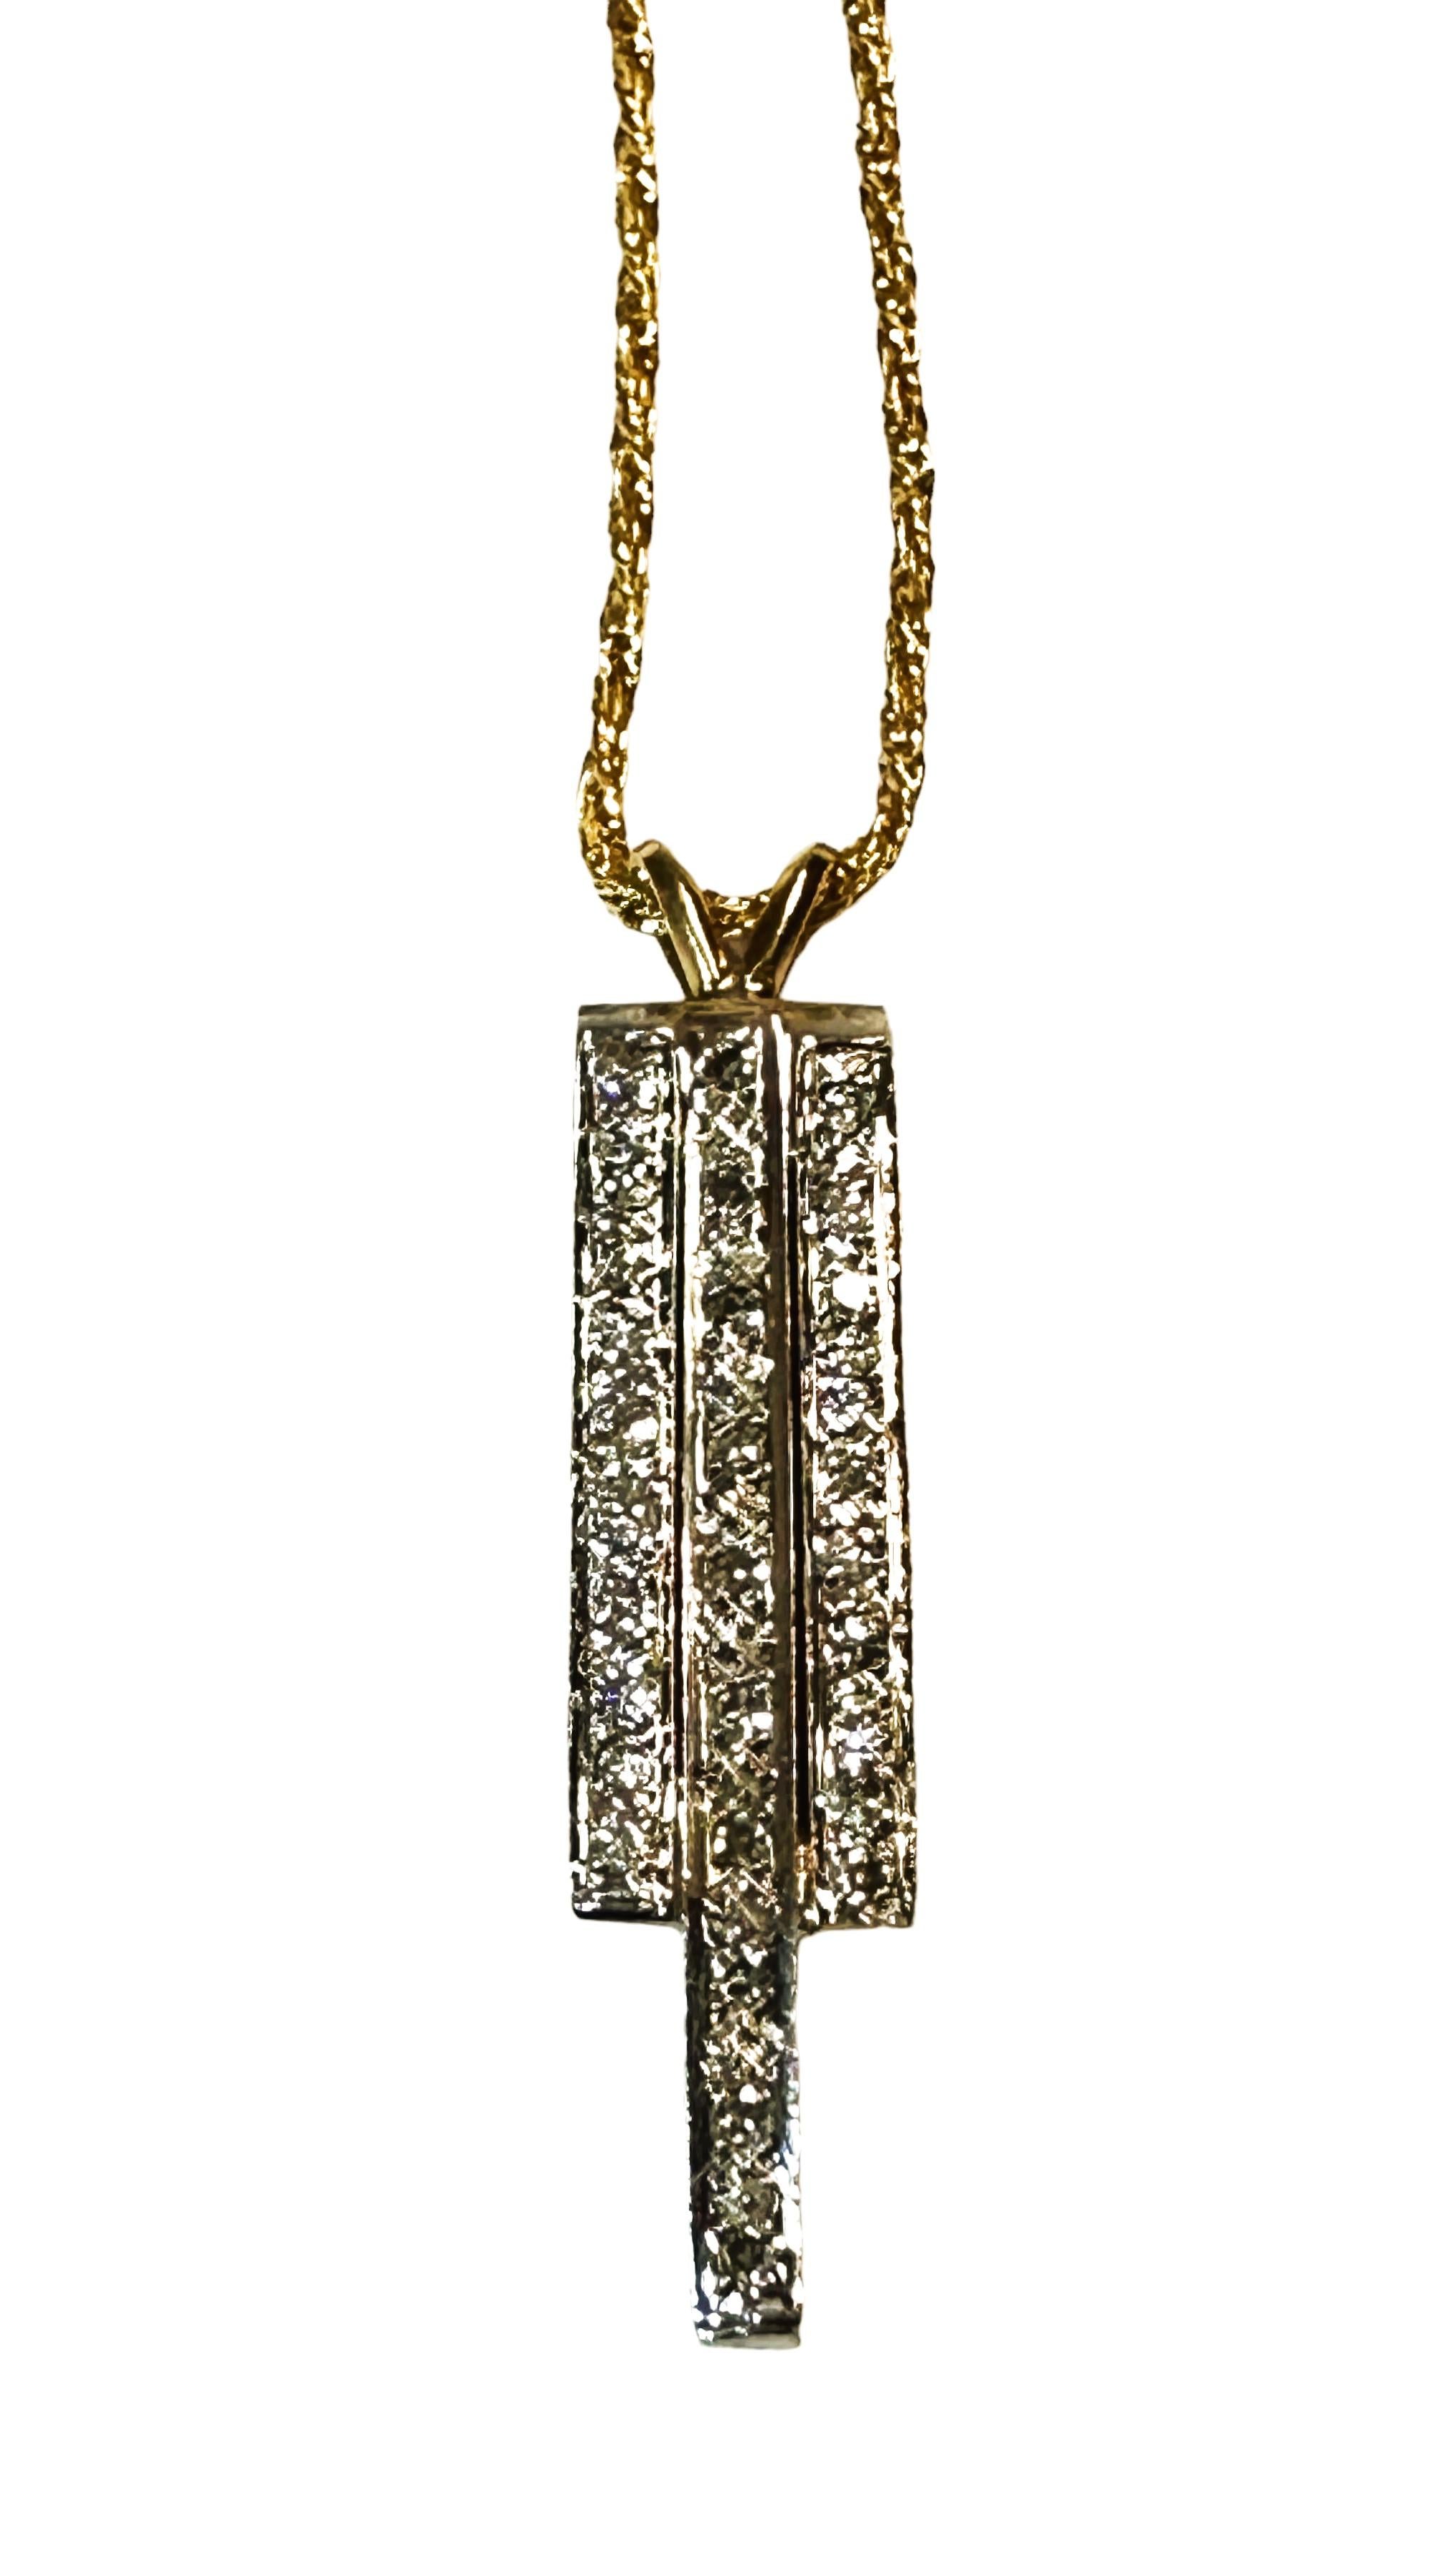 Brilliant Cut Italian Modern 14k Two Tone Gold 1.25 ct Diamond Necklace with Appraisal For Sale